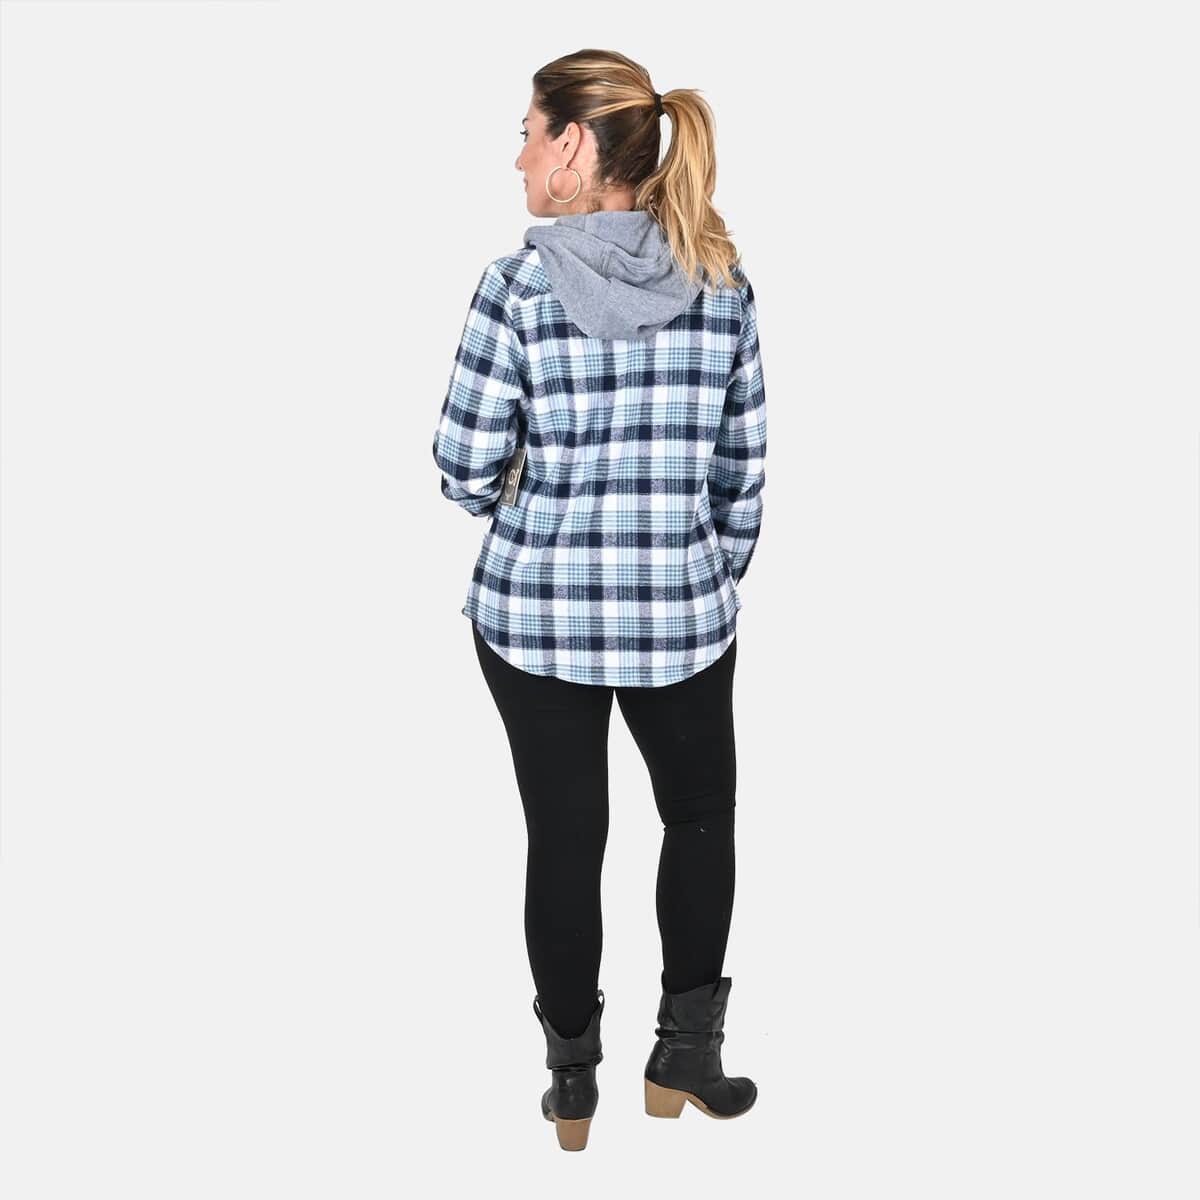 Victory Sportswear Blue and White Plaid Pattern Cotton Shirt with Fleece Hood -M image number 1